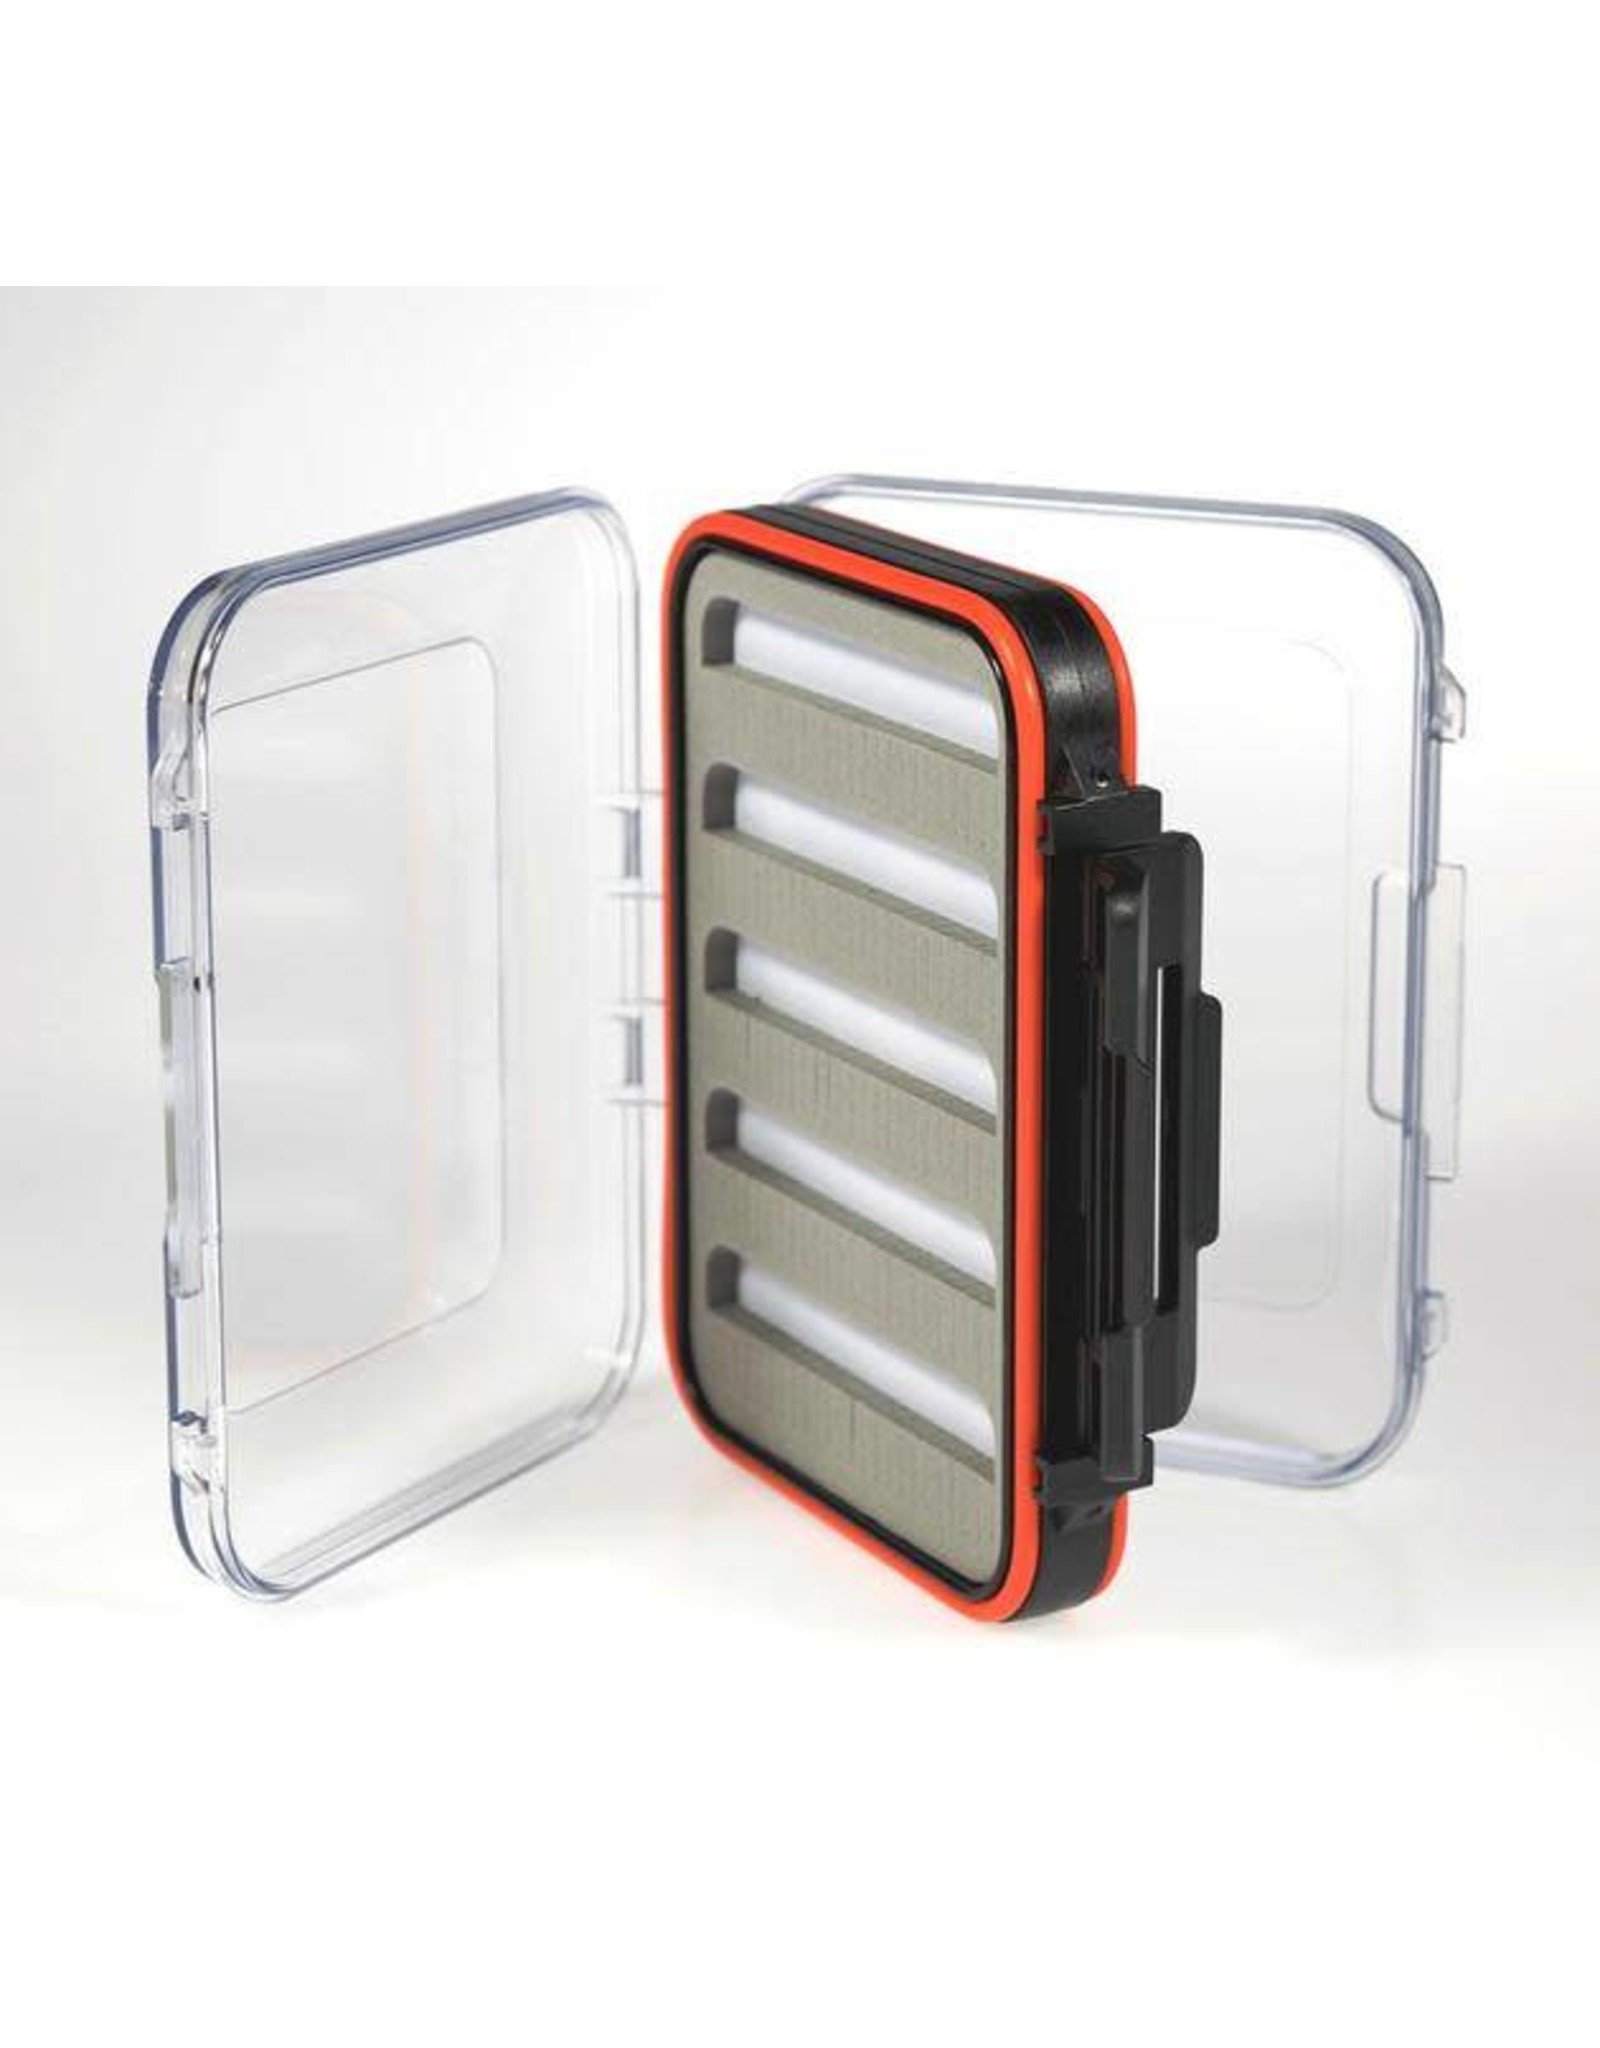 New Phase New Phase Double sided waterproof fly boxes